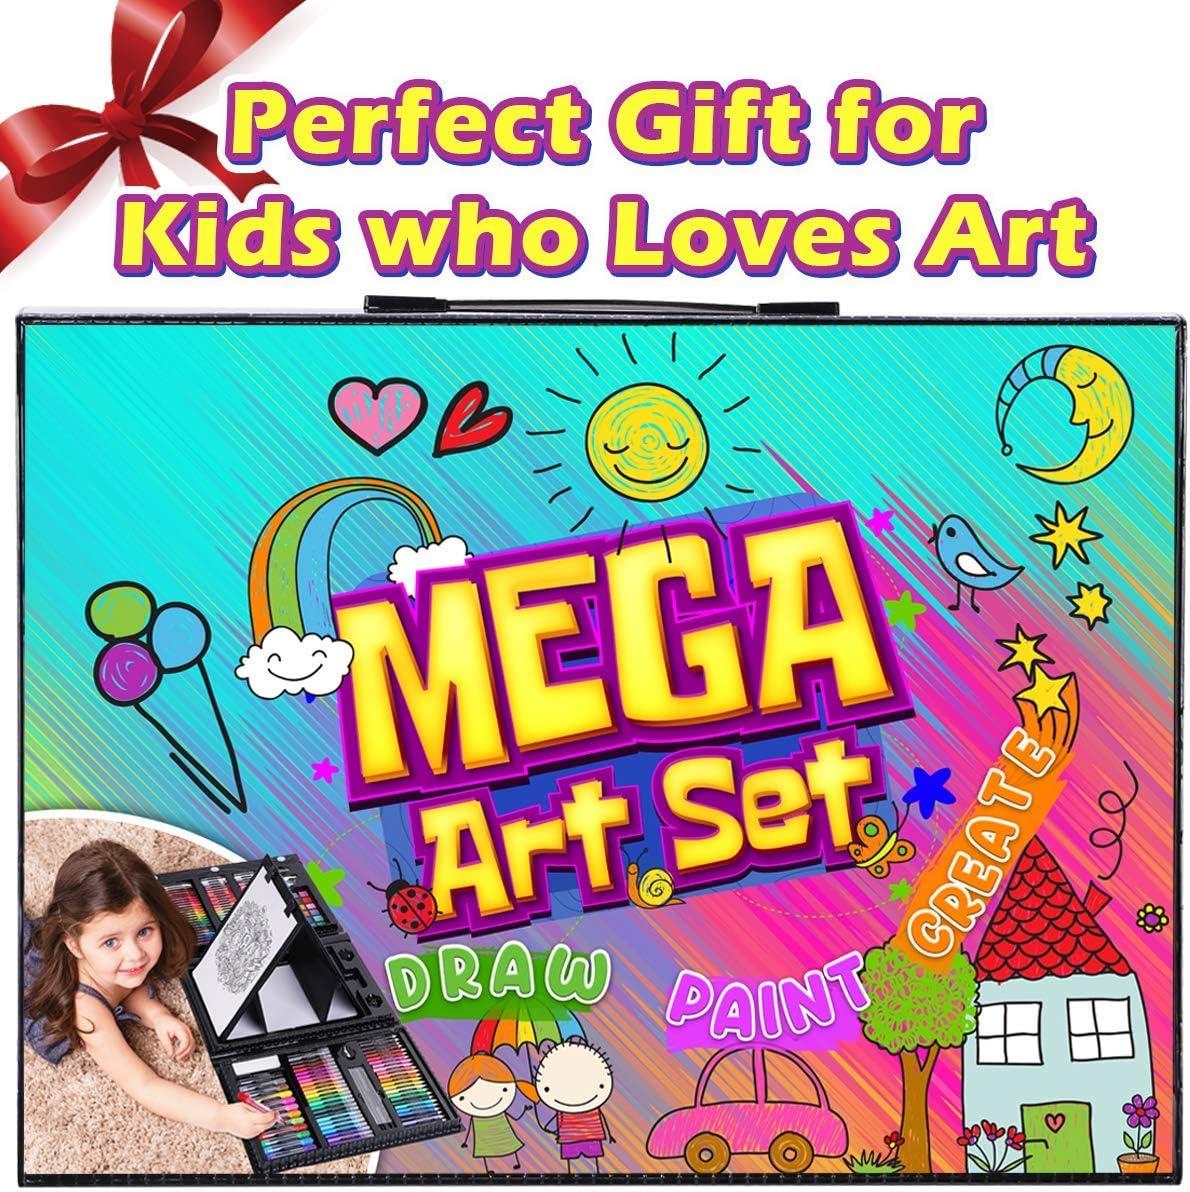  Drawing Supplies,Kids Paint with Dinosaur,Crayons for Kids Ages  4-8-12,Colored Pencils for Kids Ages 4-8-12,Oil Pastels for Kids,Washable  Markers for Kids Ages 2-8,Paint Paper,Drawing Pad for Kids : Toys & Games